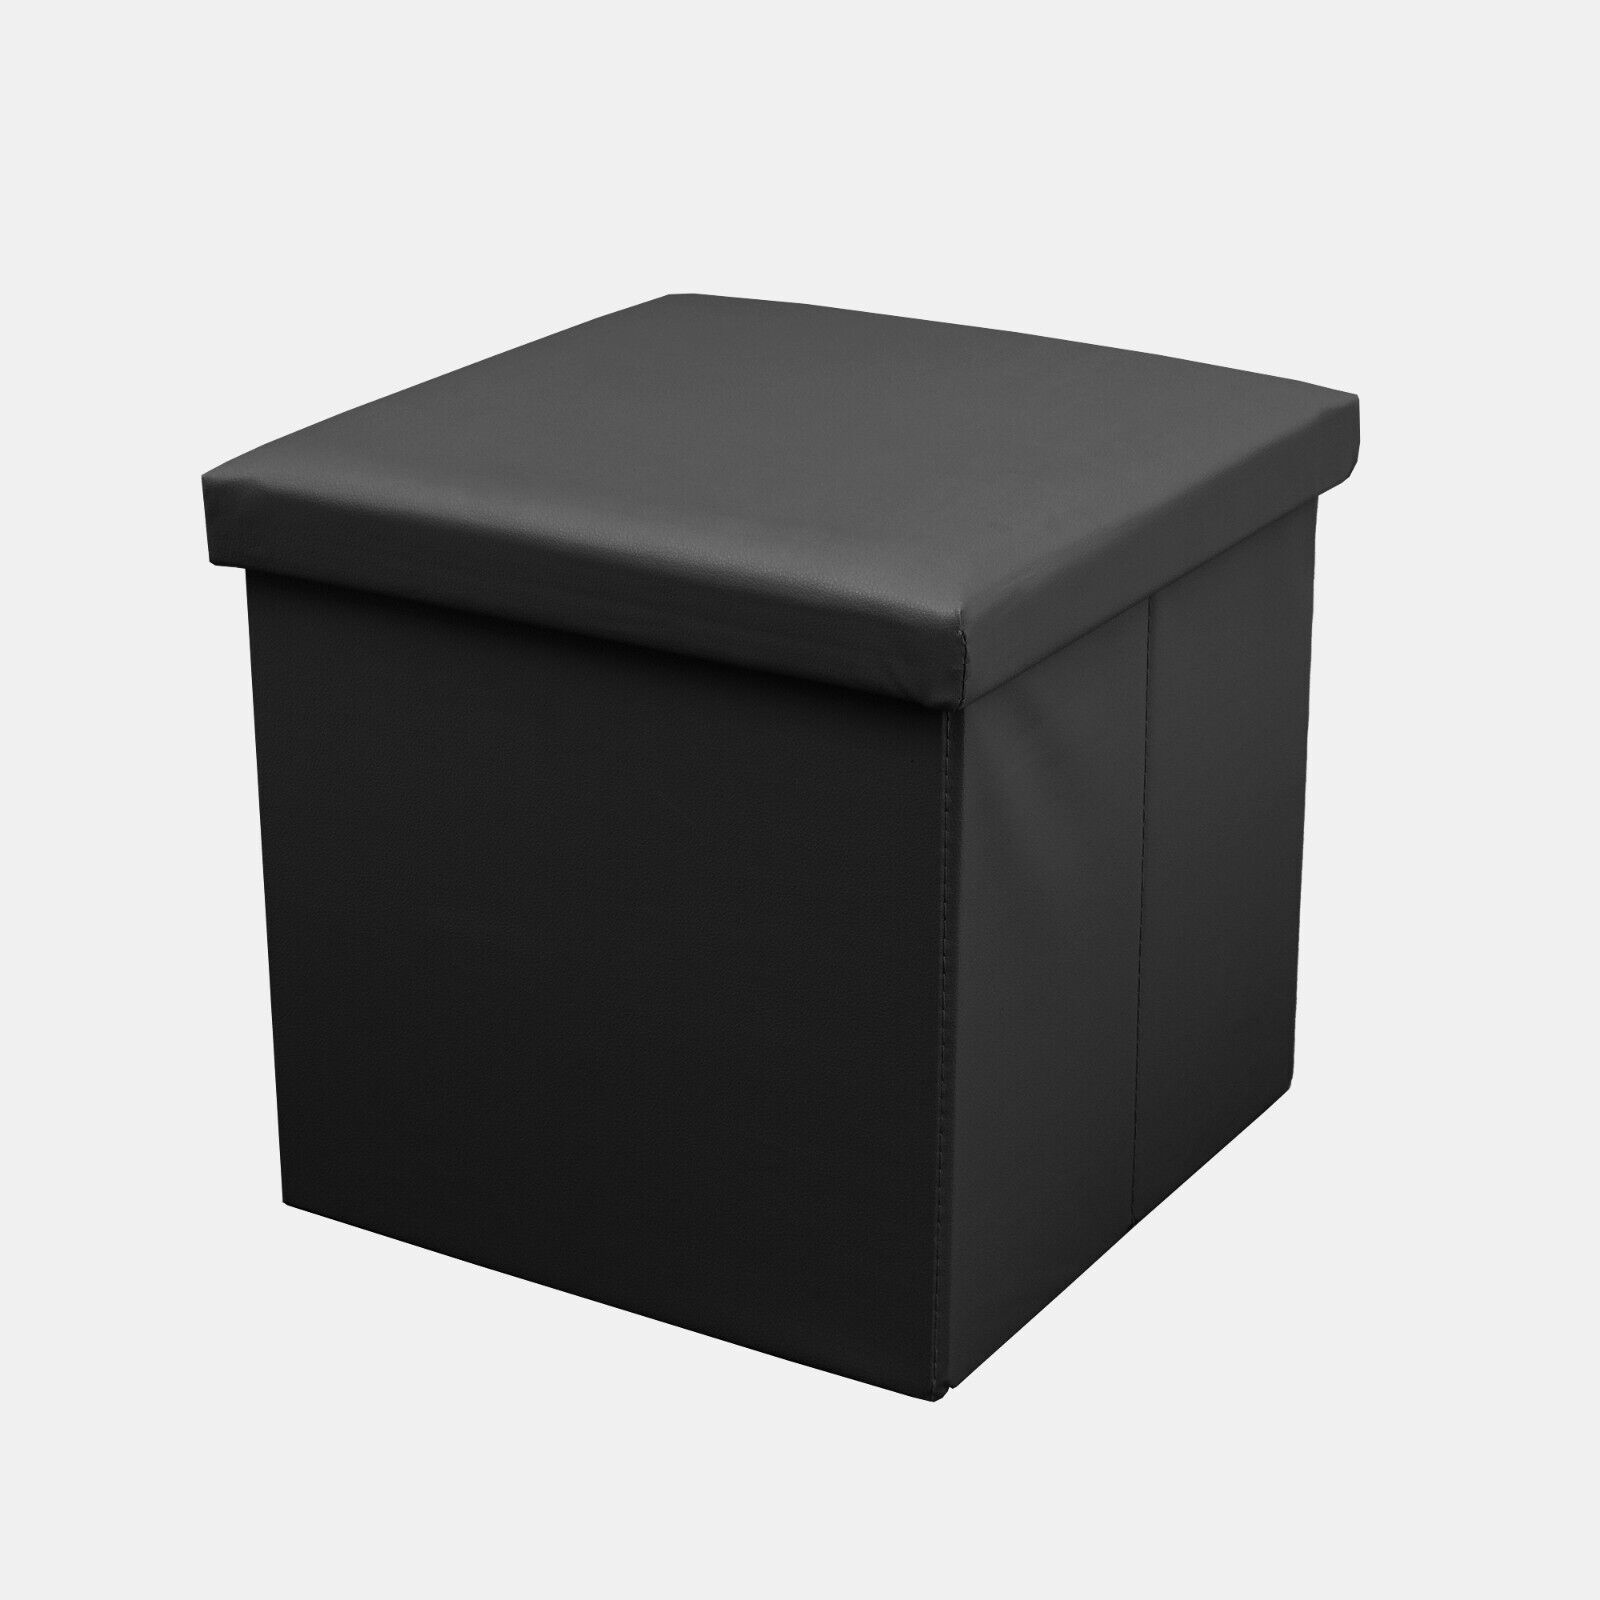 Black Faux Leather Foldable Storage Box Small